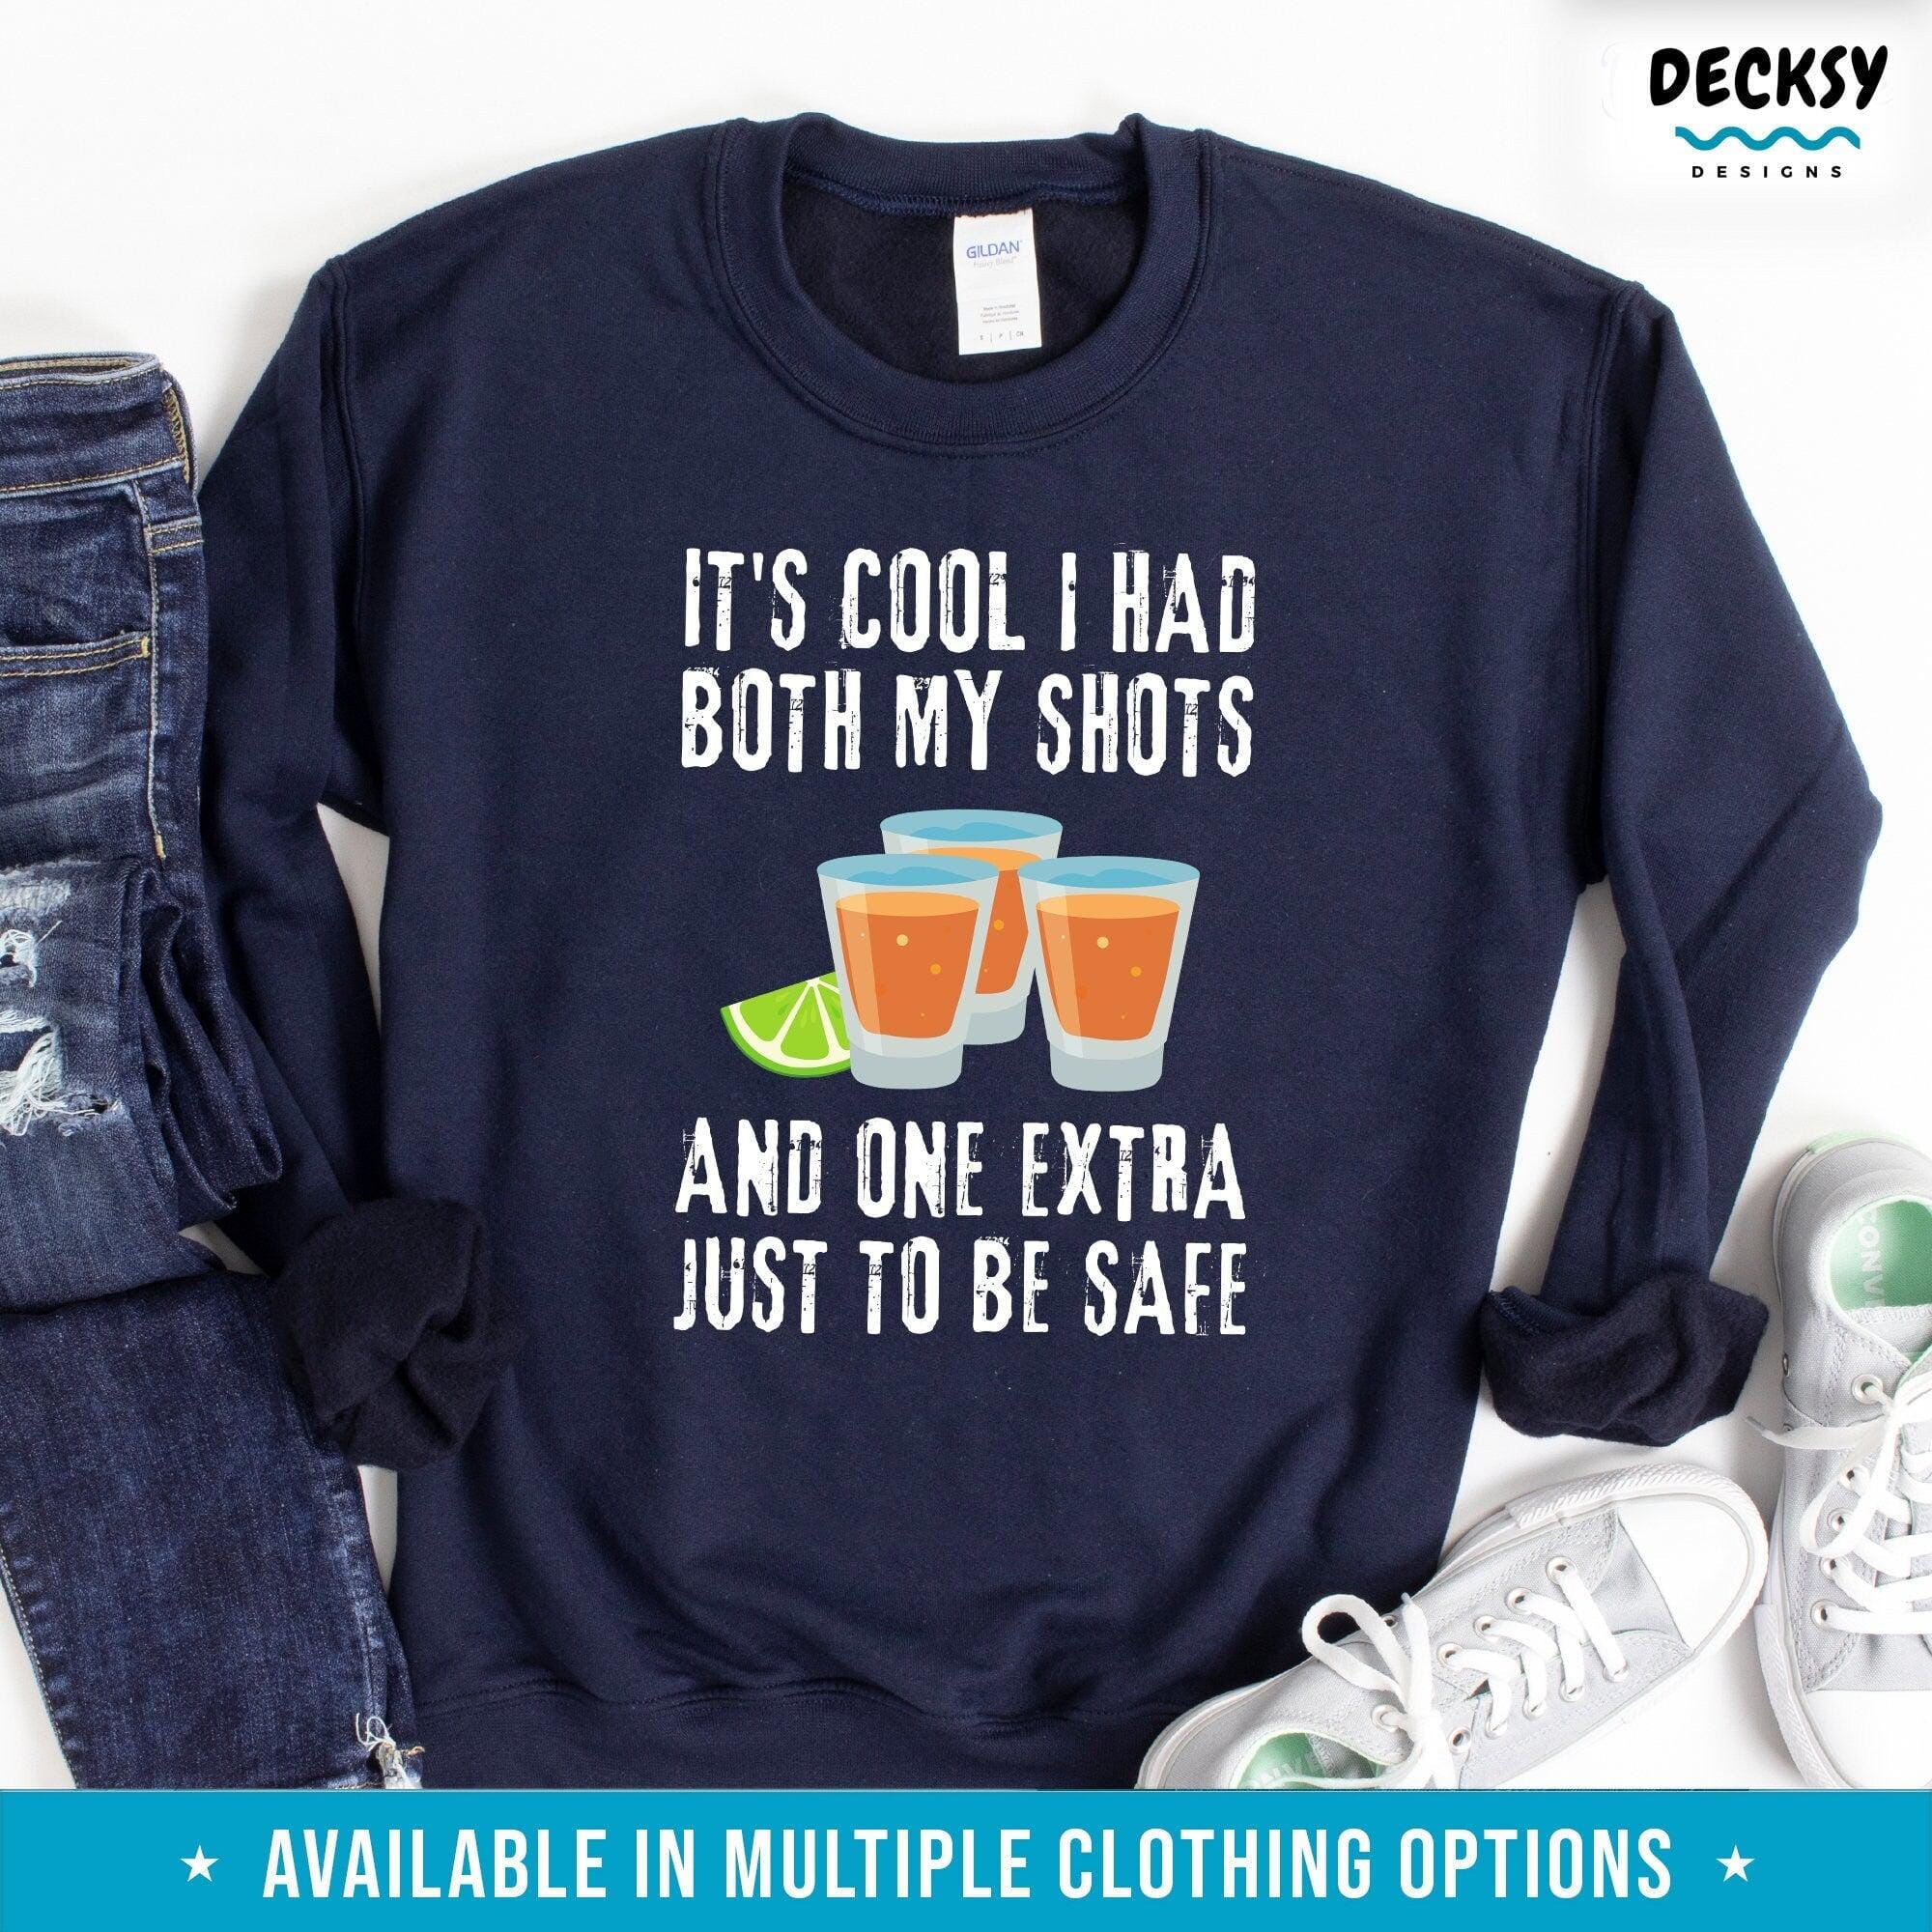 Funny Booster Shirt, Fully Vaccinated Gift-Clothing:Gender-Neutral Adult Clothing:Tops & Tees:T-shirts:Graphic Tees-DecksyDesigns